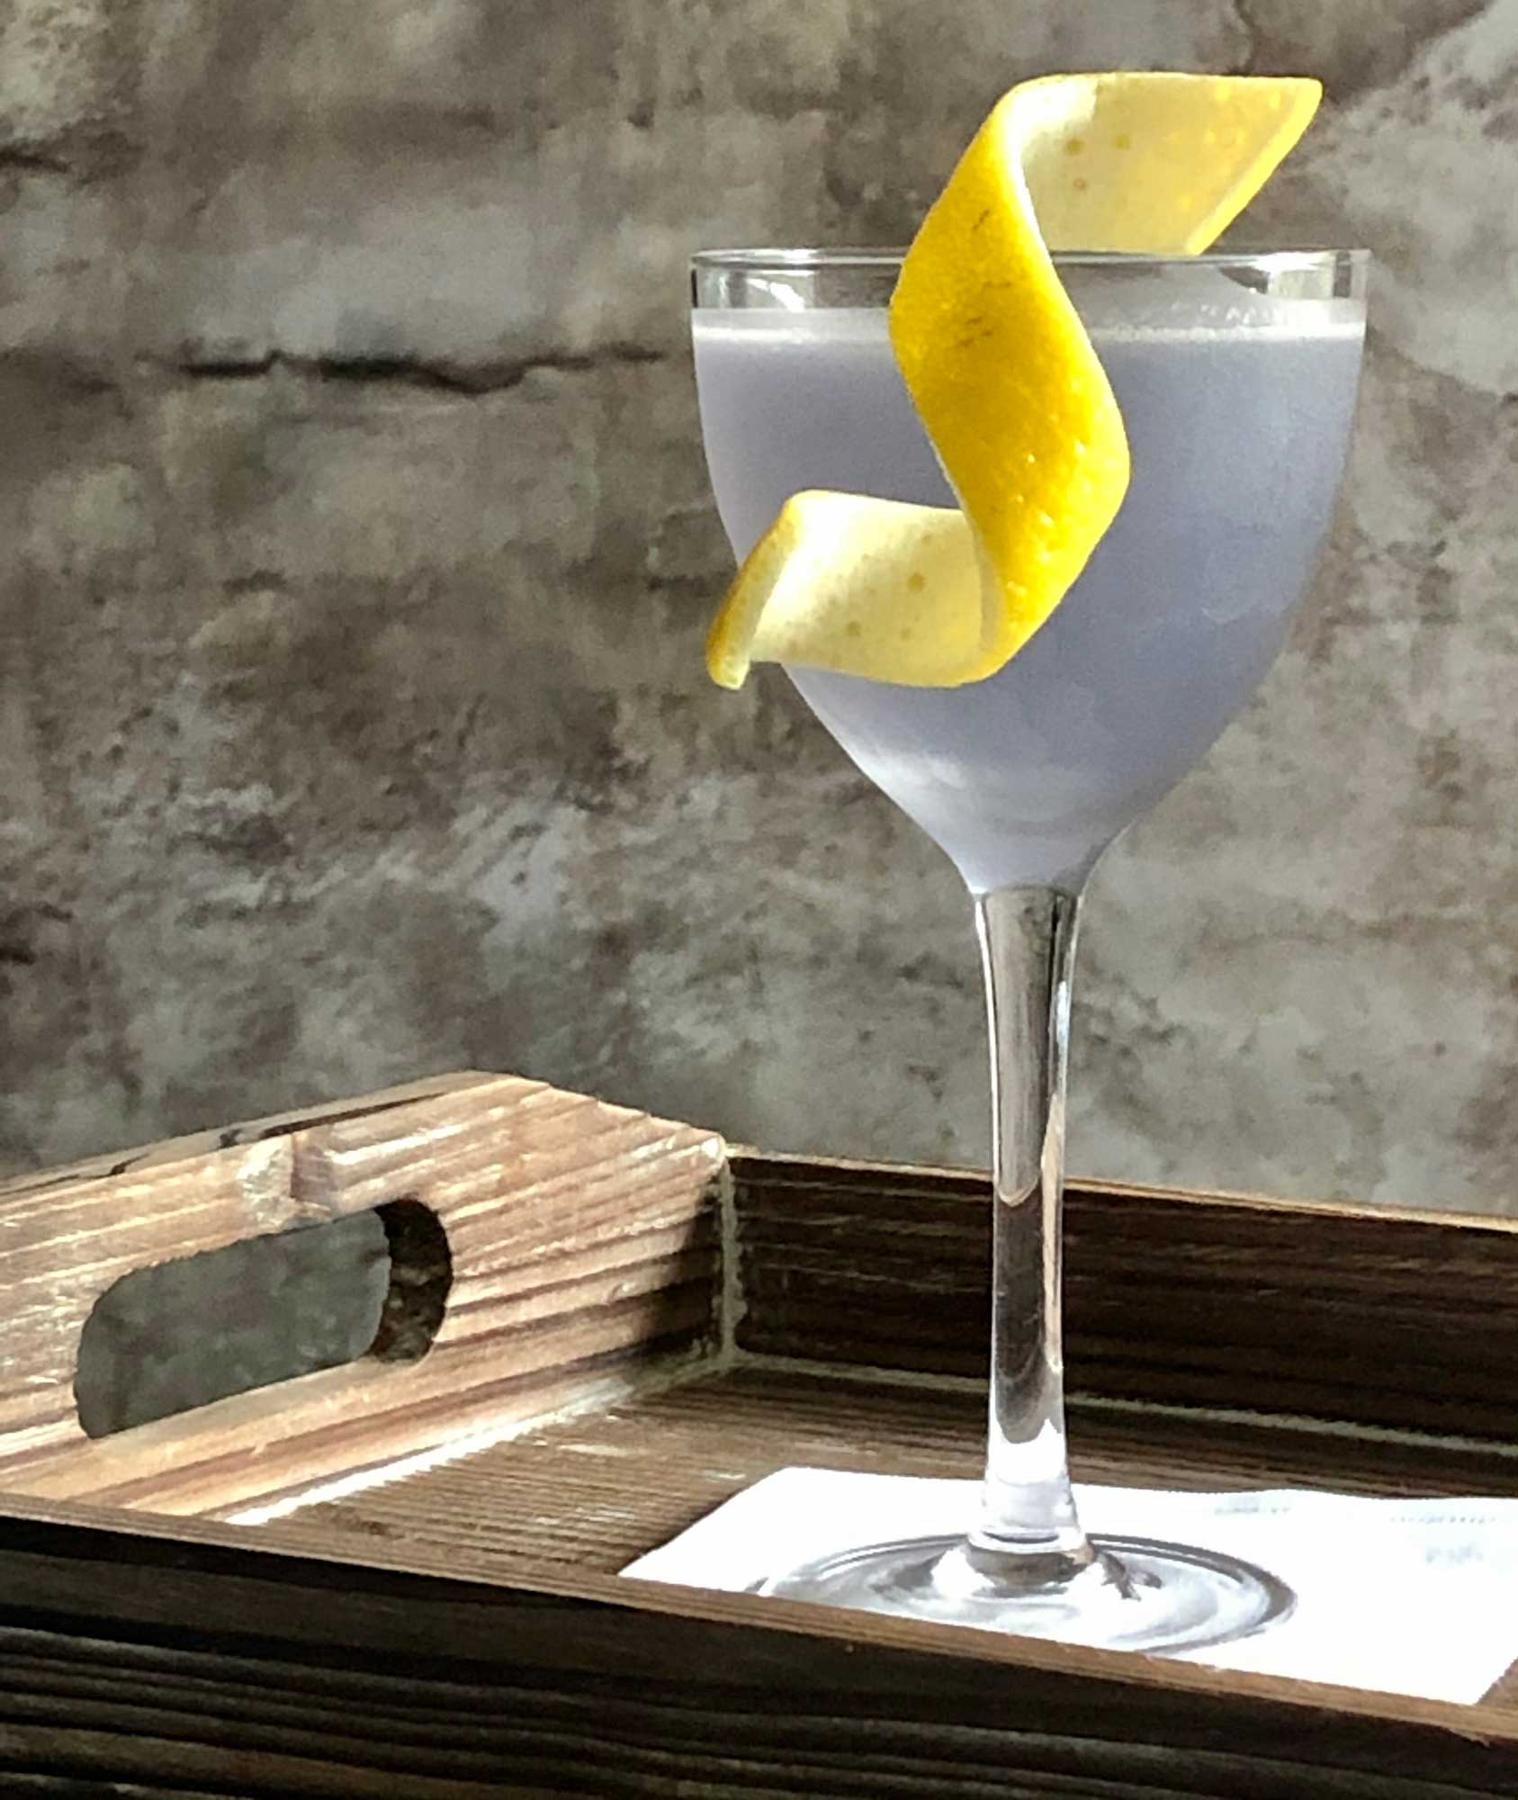 An example of the Blue Moon, the mixed drink (drink) featuring Hayman’s London Dry Gin, Rothman & Winter Crème de Violette, lemon juice, and lemon twist; photo by Lee Edwards